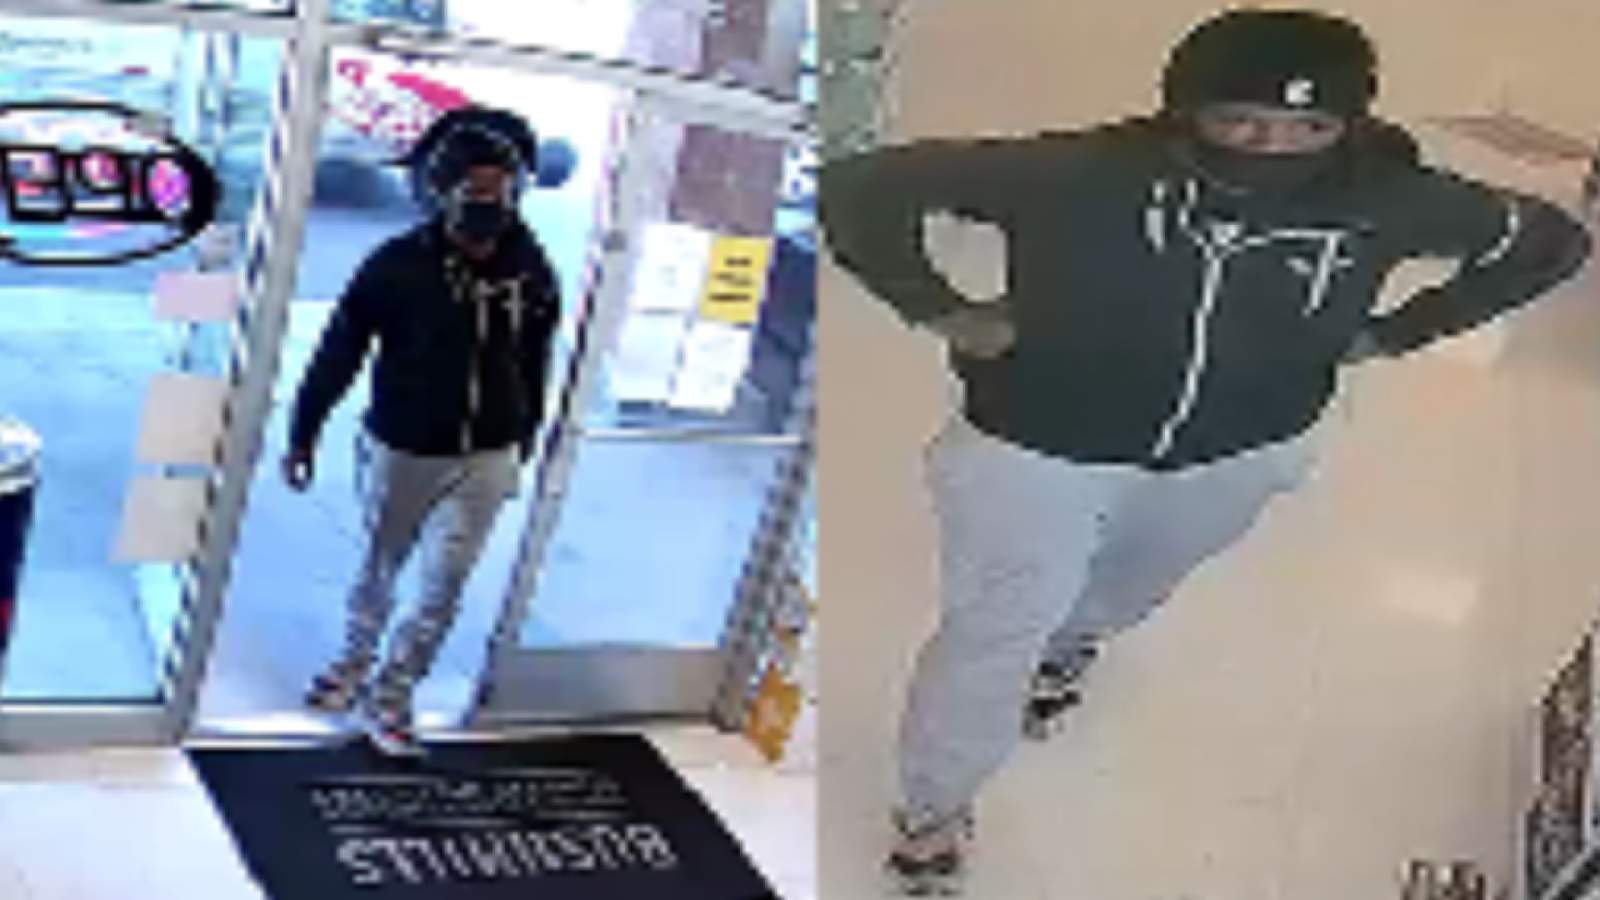 Police, Crime Stoppers seek suspects who robbed liquor store, injured employee with vehicle